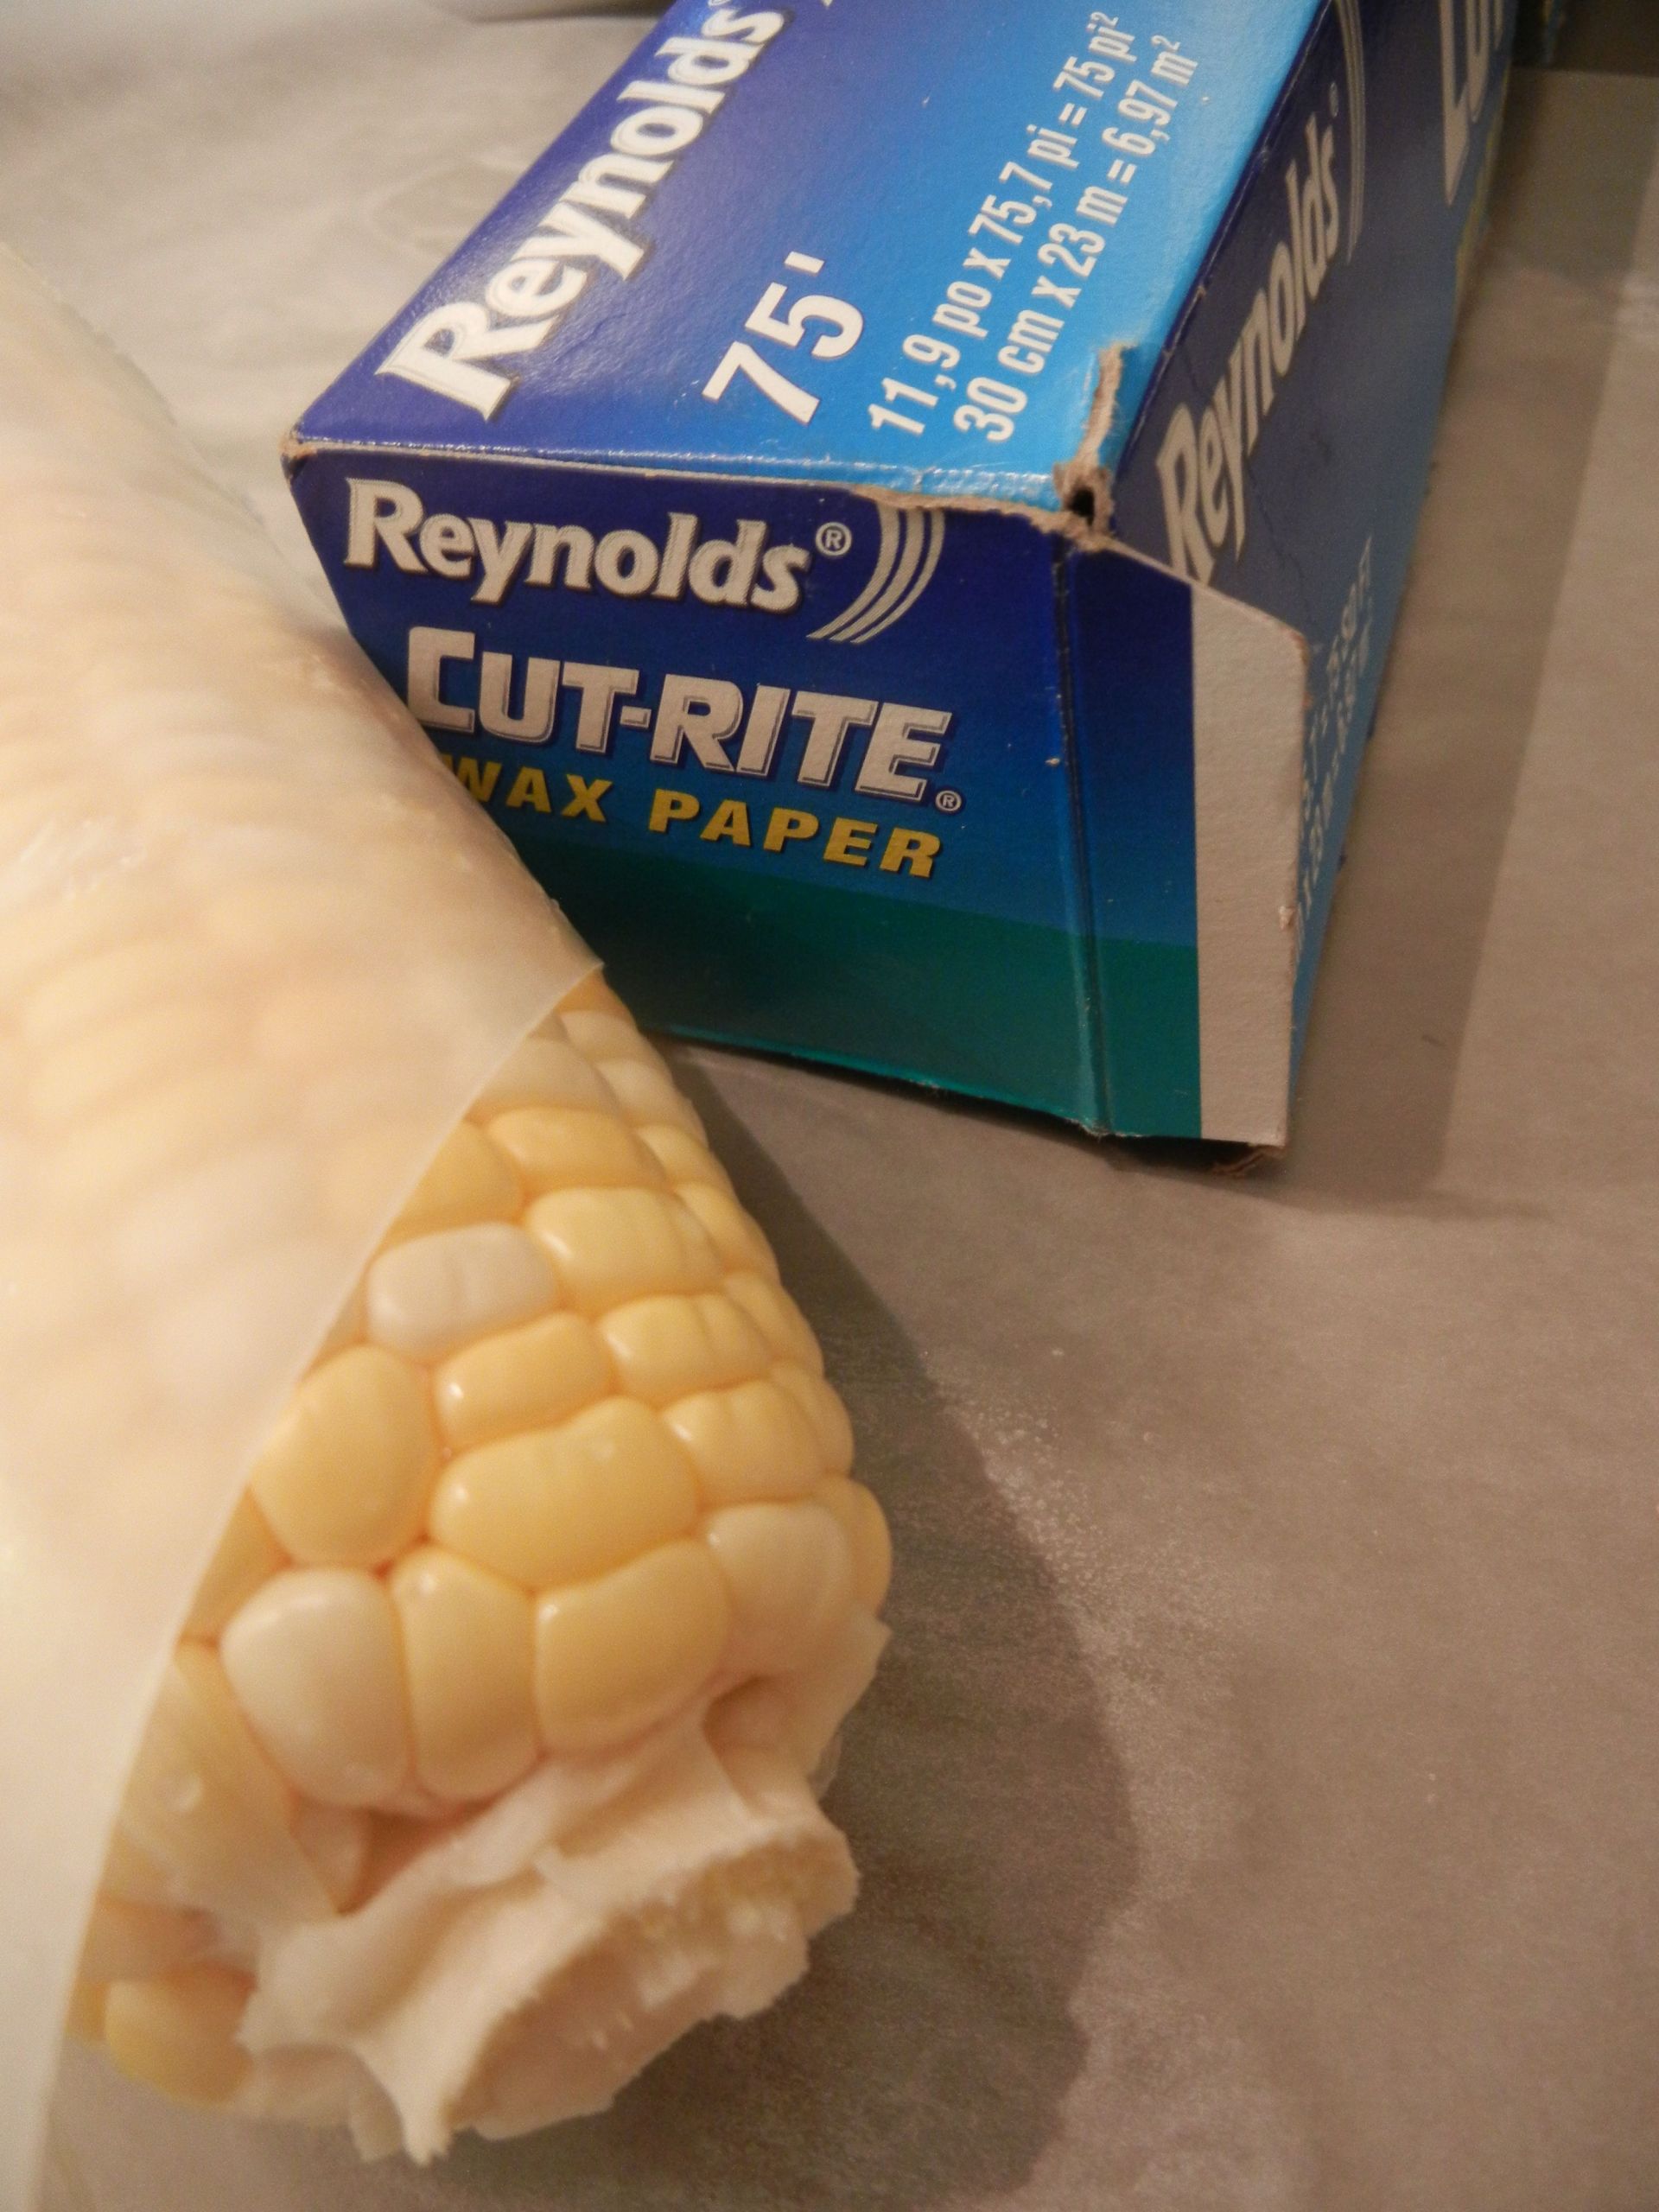 Microwave Corn On The Cob Wax Paper
 Super Easy Corn on the cob Wrap in wax paper 3 min per